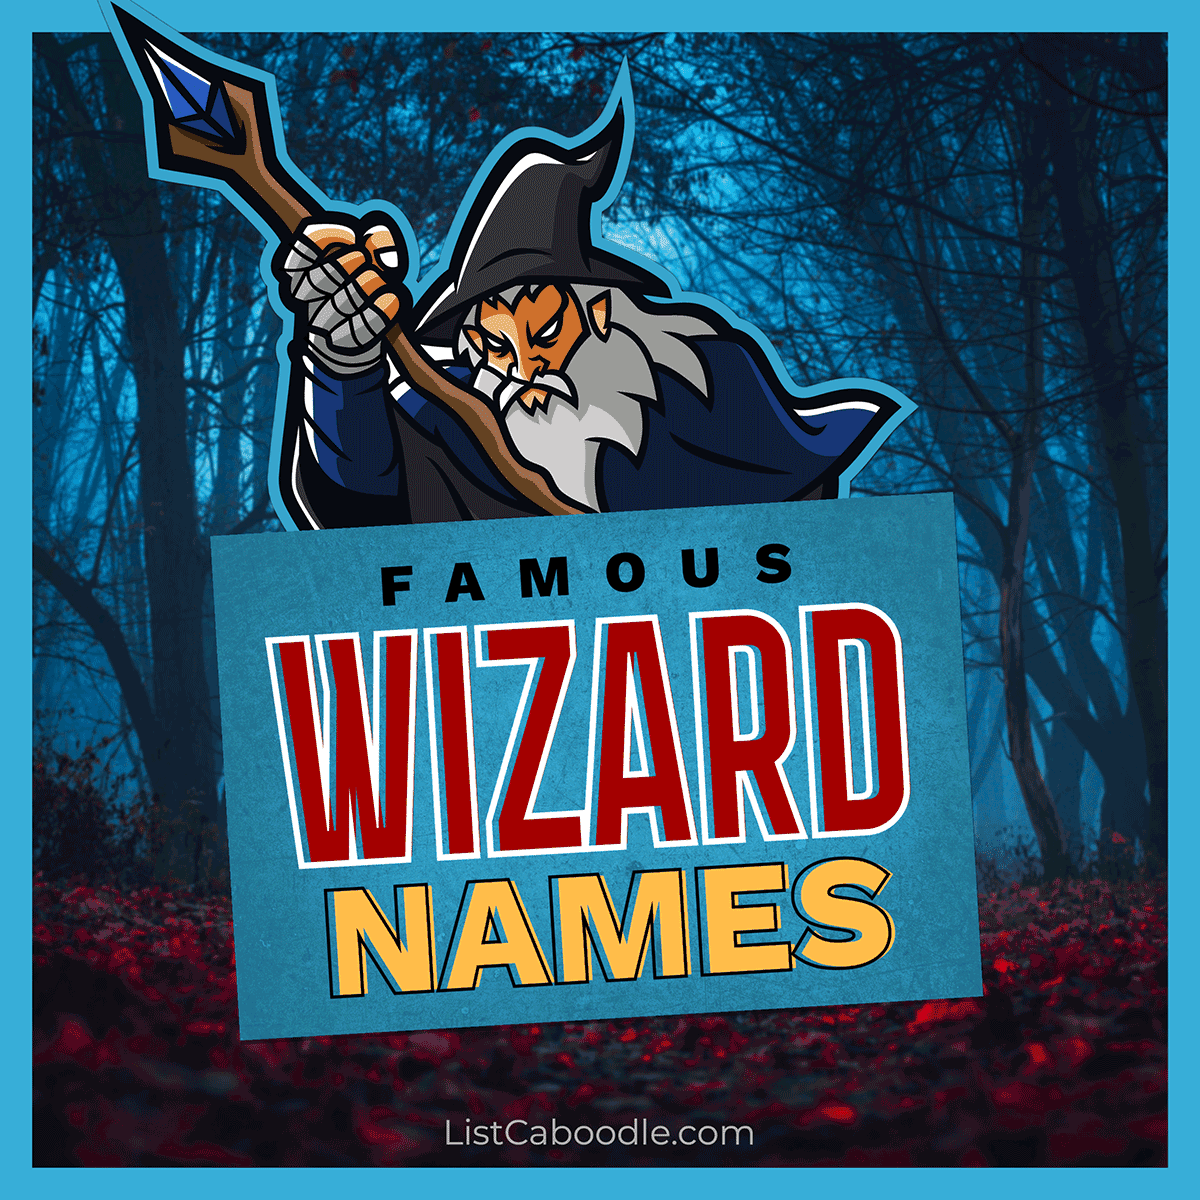 Famous wizard names